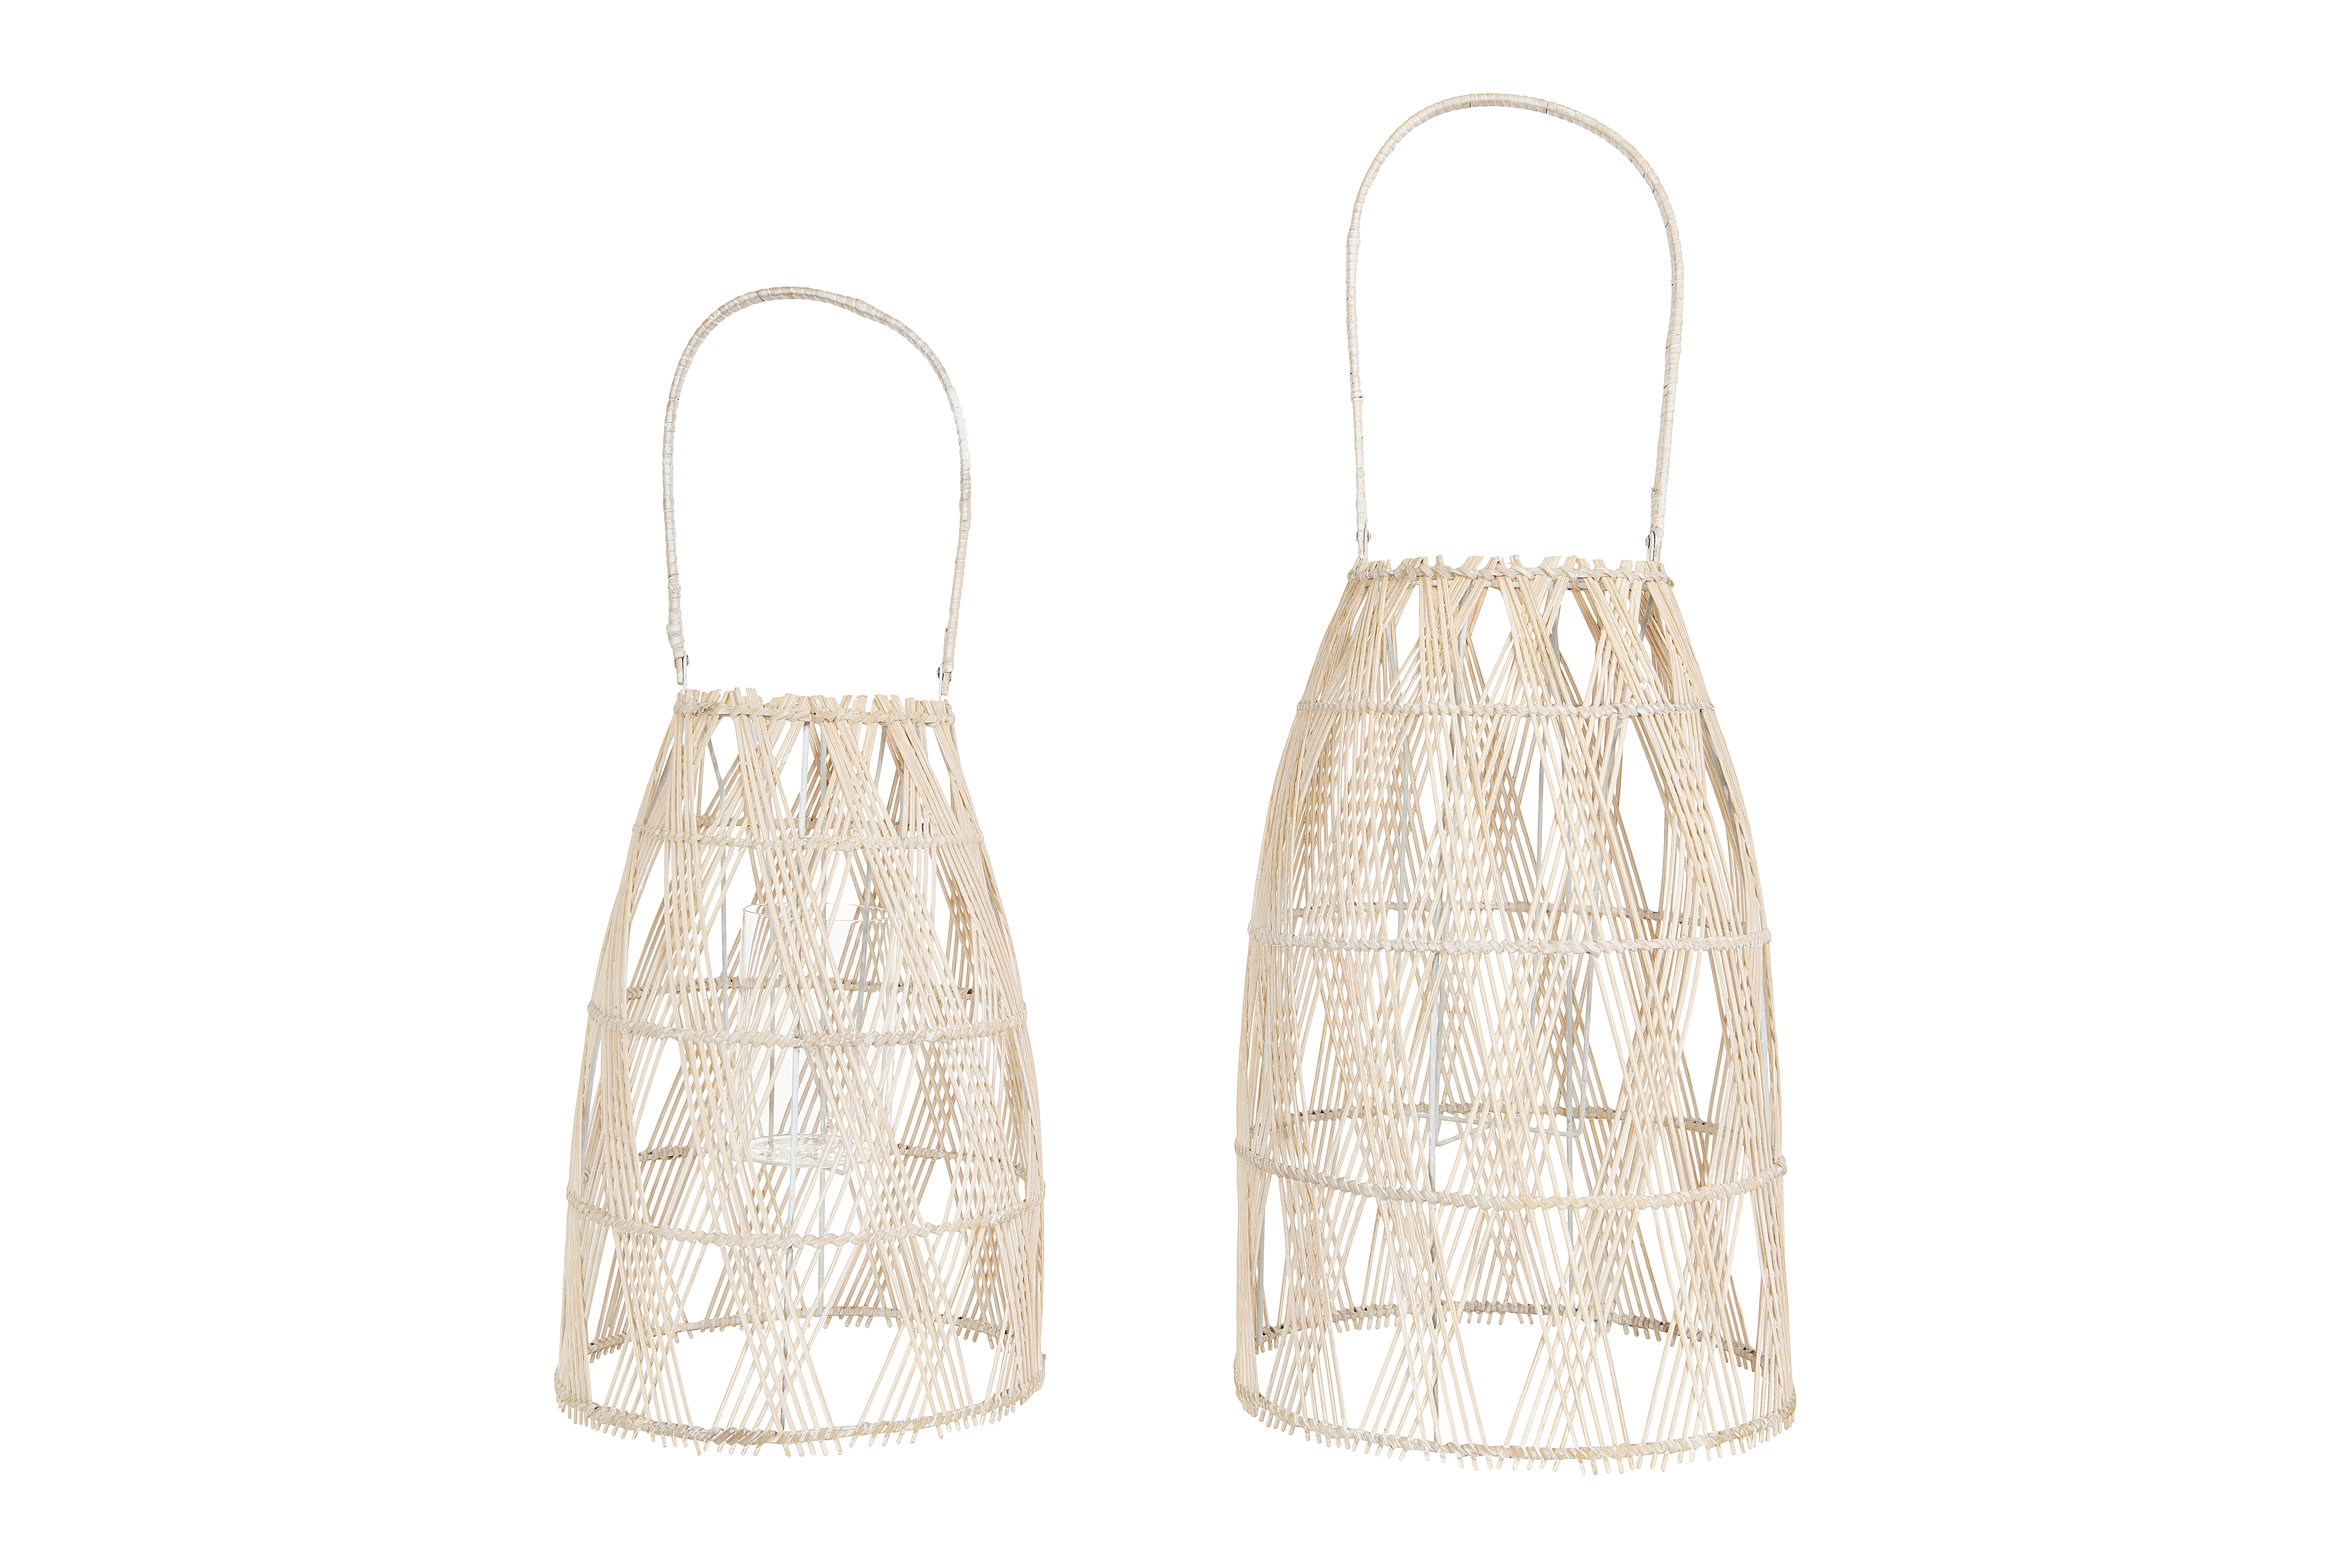 Woven Bamboo Lanterns with Glass Inserts & Handles (Set of 2 Sizes) - Nomad Home